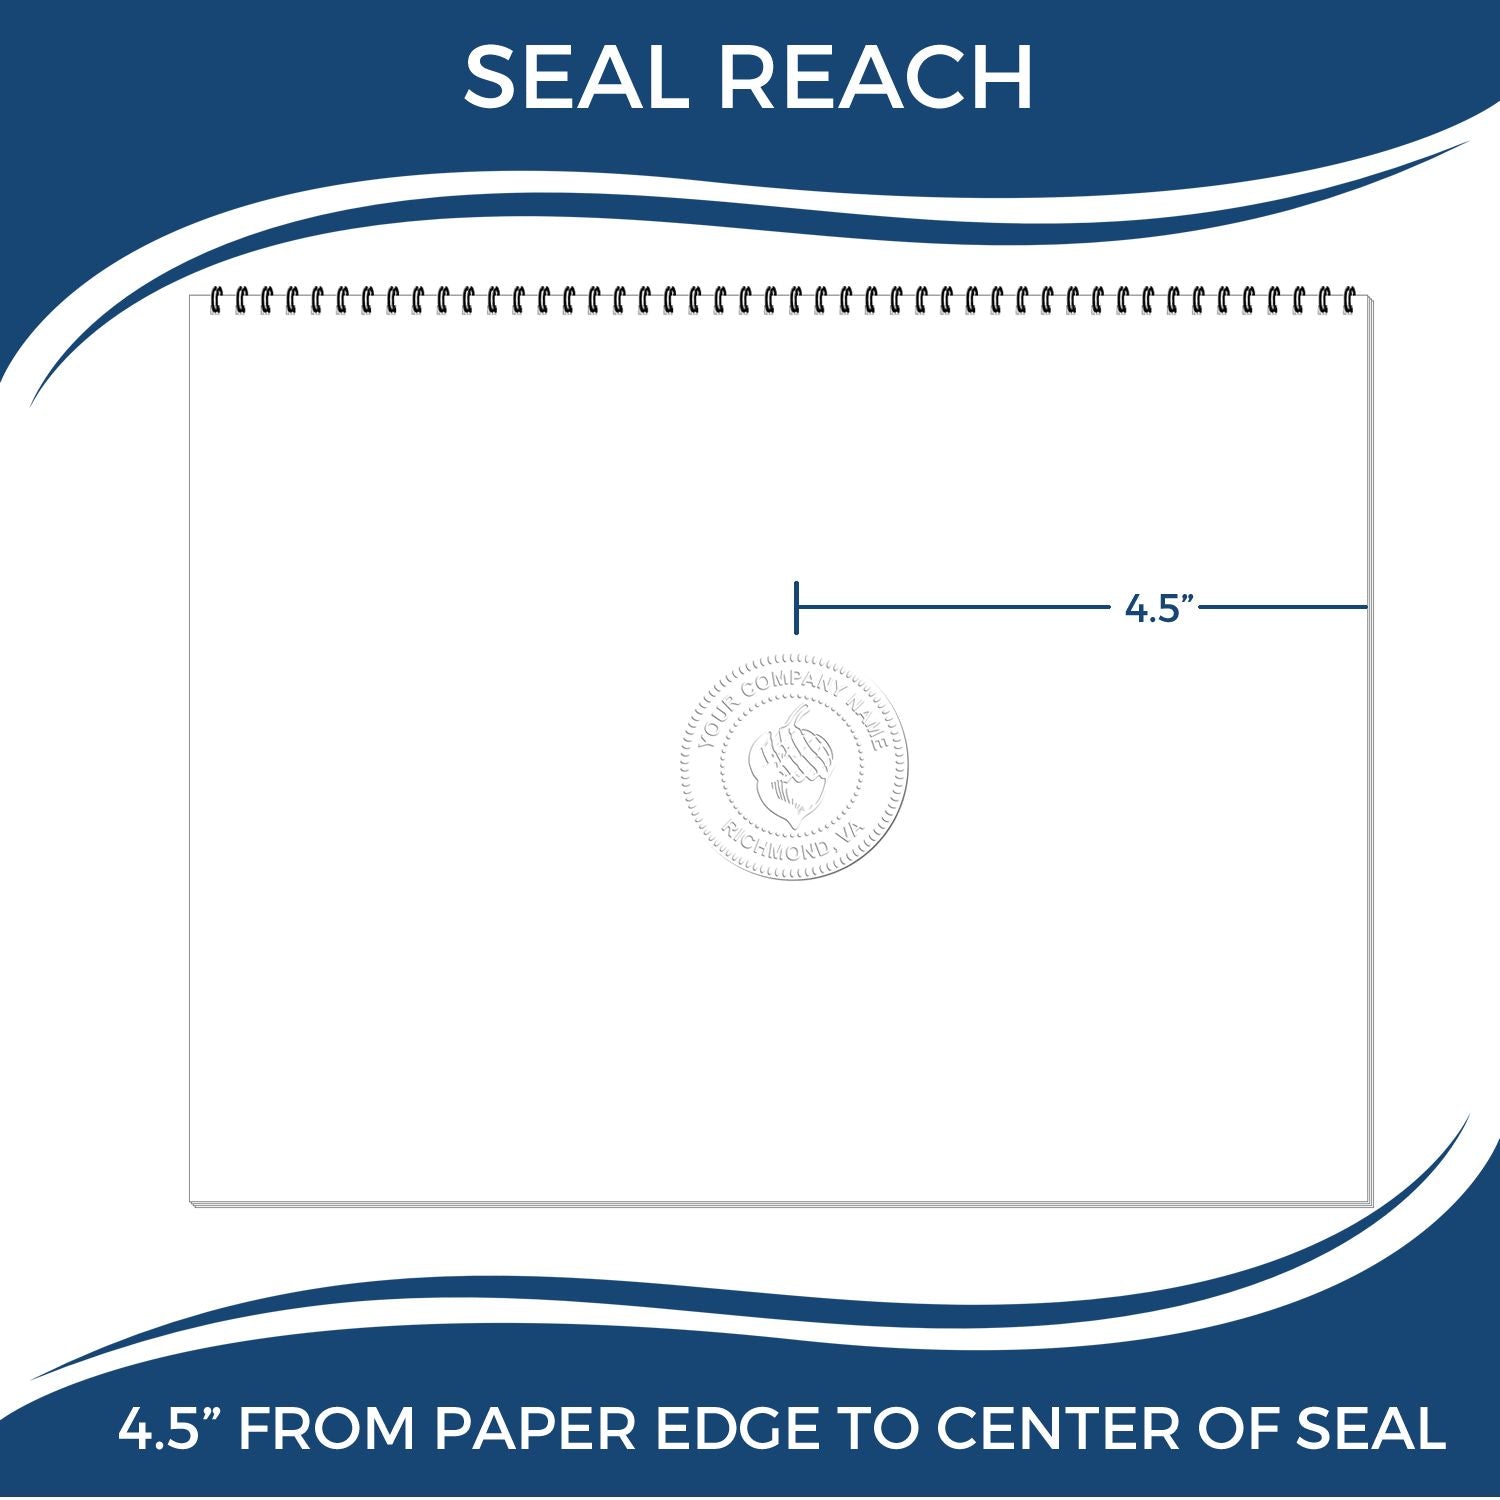 An infographic showing the seal reach which is represented by a ruler and a miniature seal image of the State of Kentucky Extended Long Reach Geologist Seal